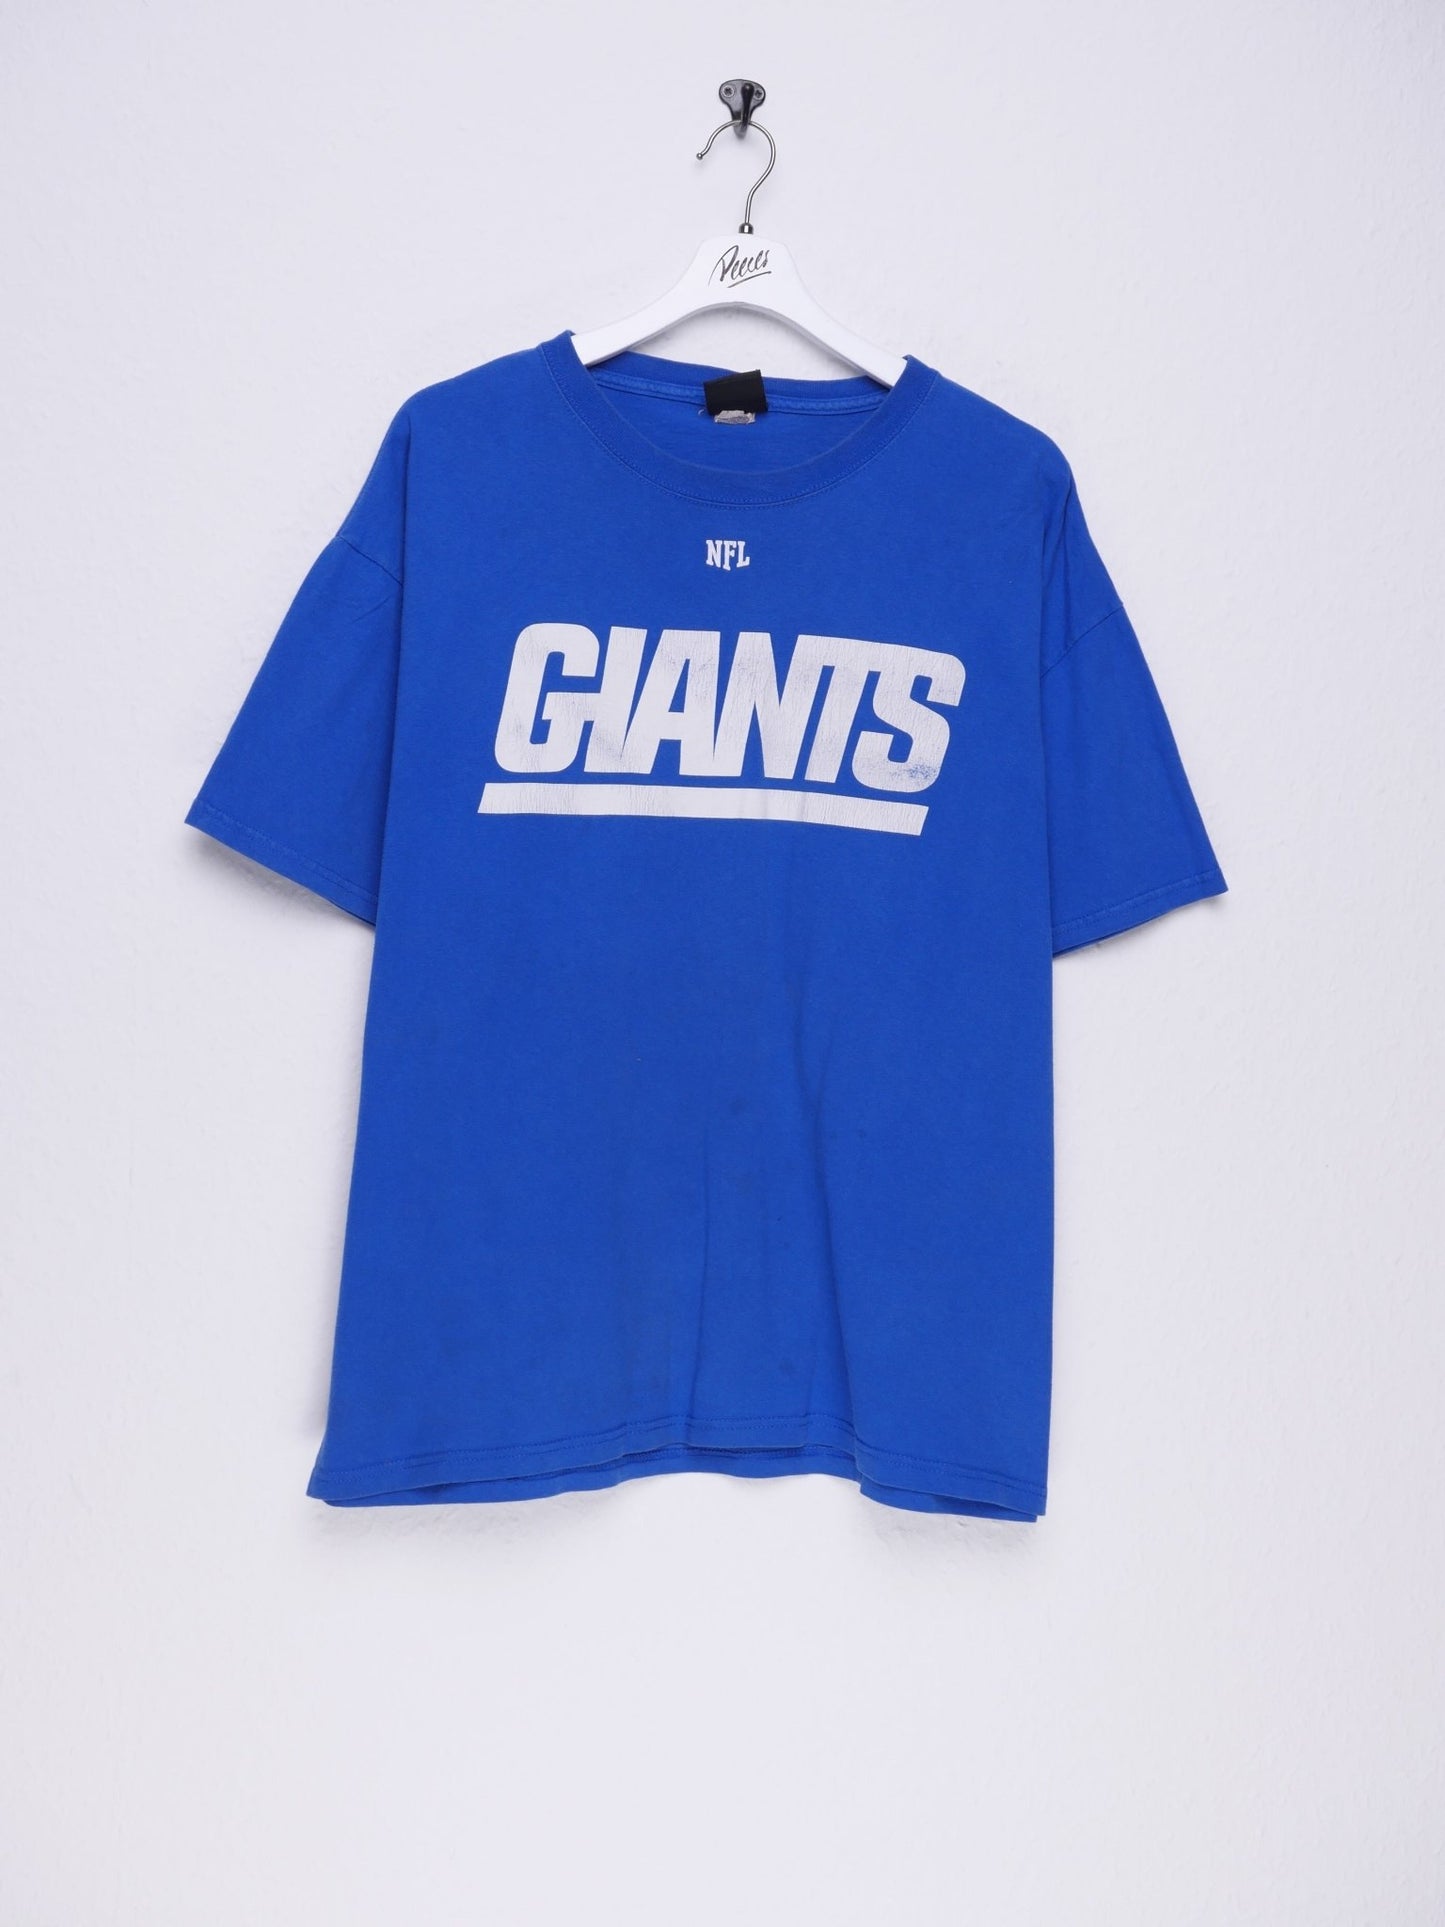 nfl 'New York Giants' printed Spellout blue Shirt - Peeces